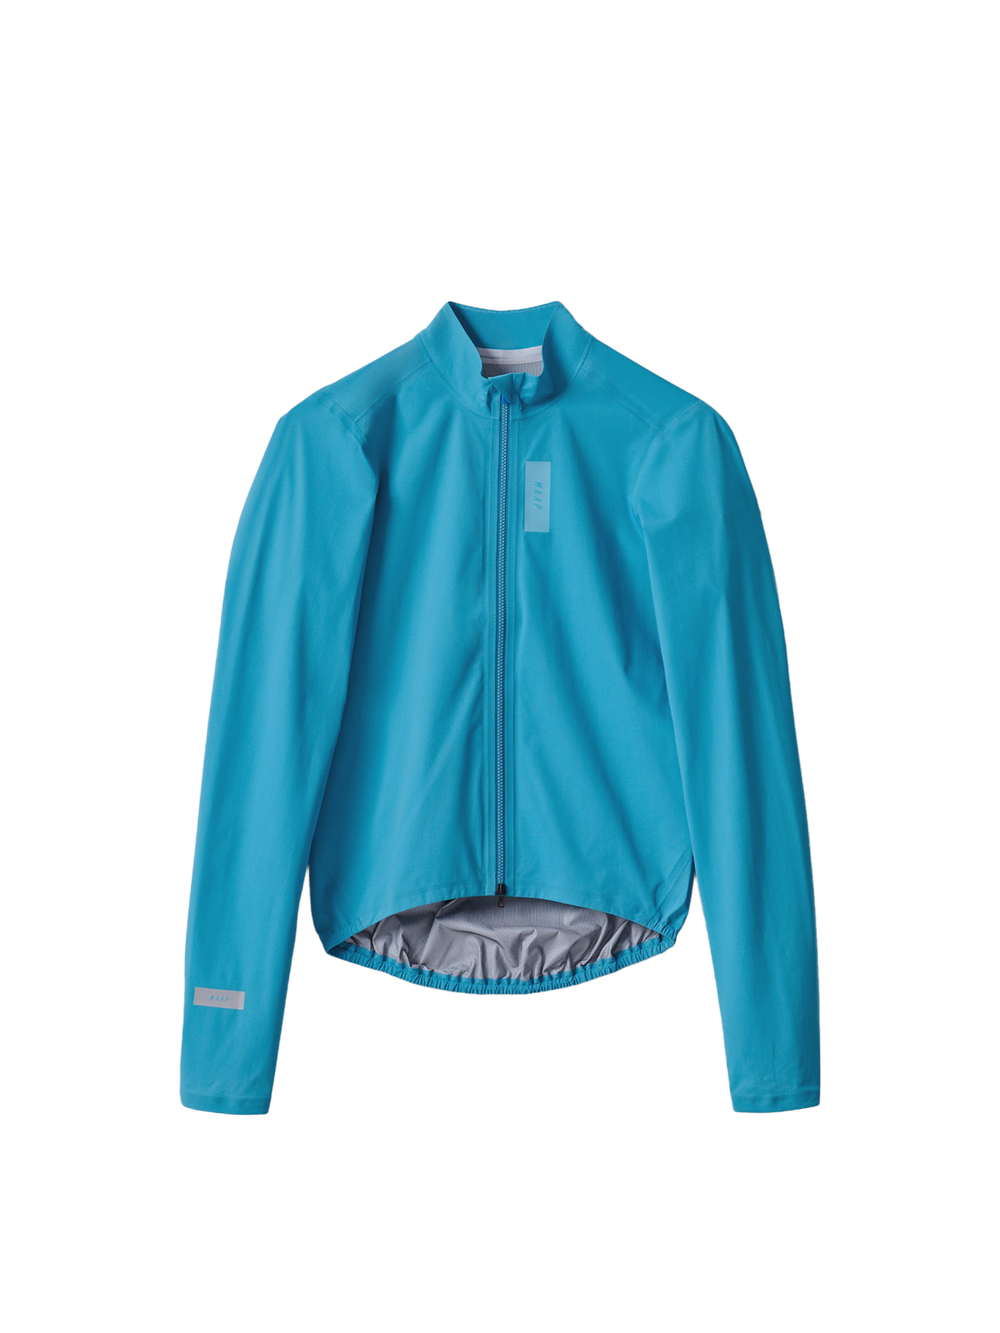 Product Image for Atmos Jacket